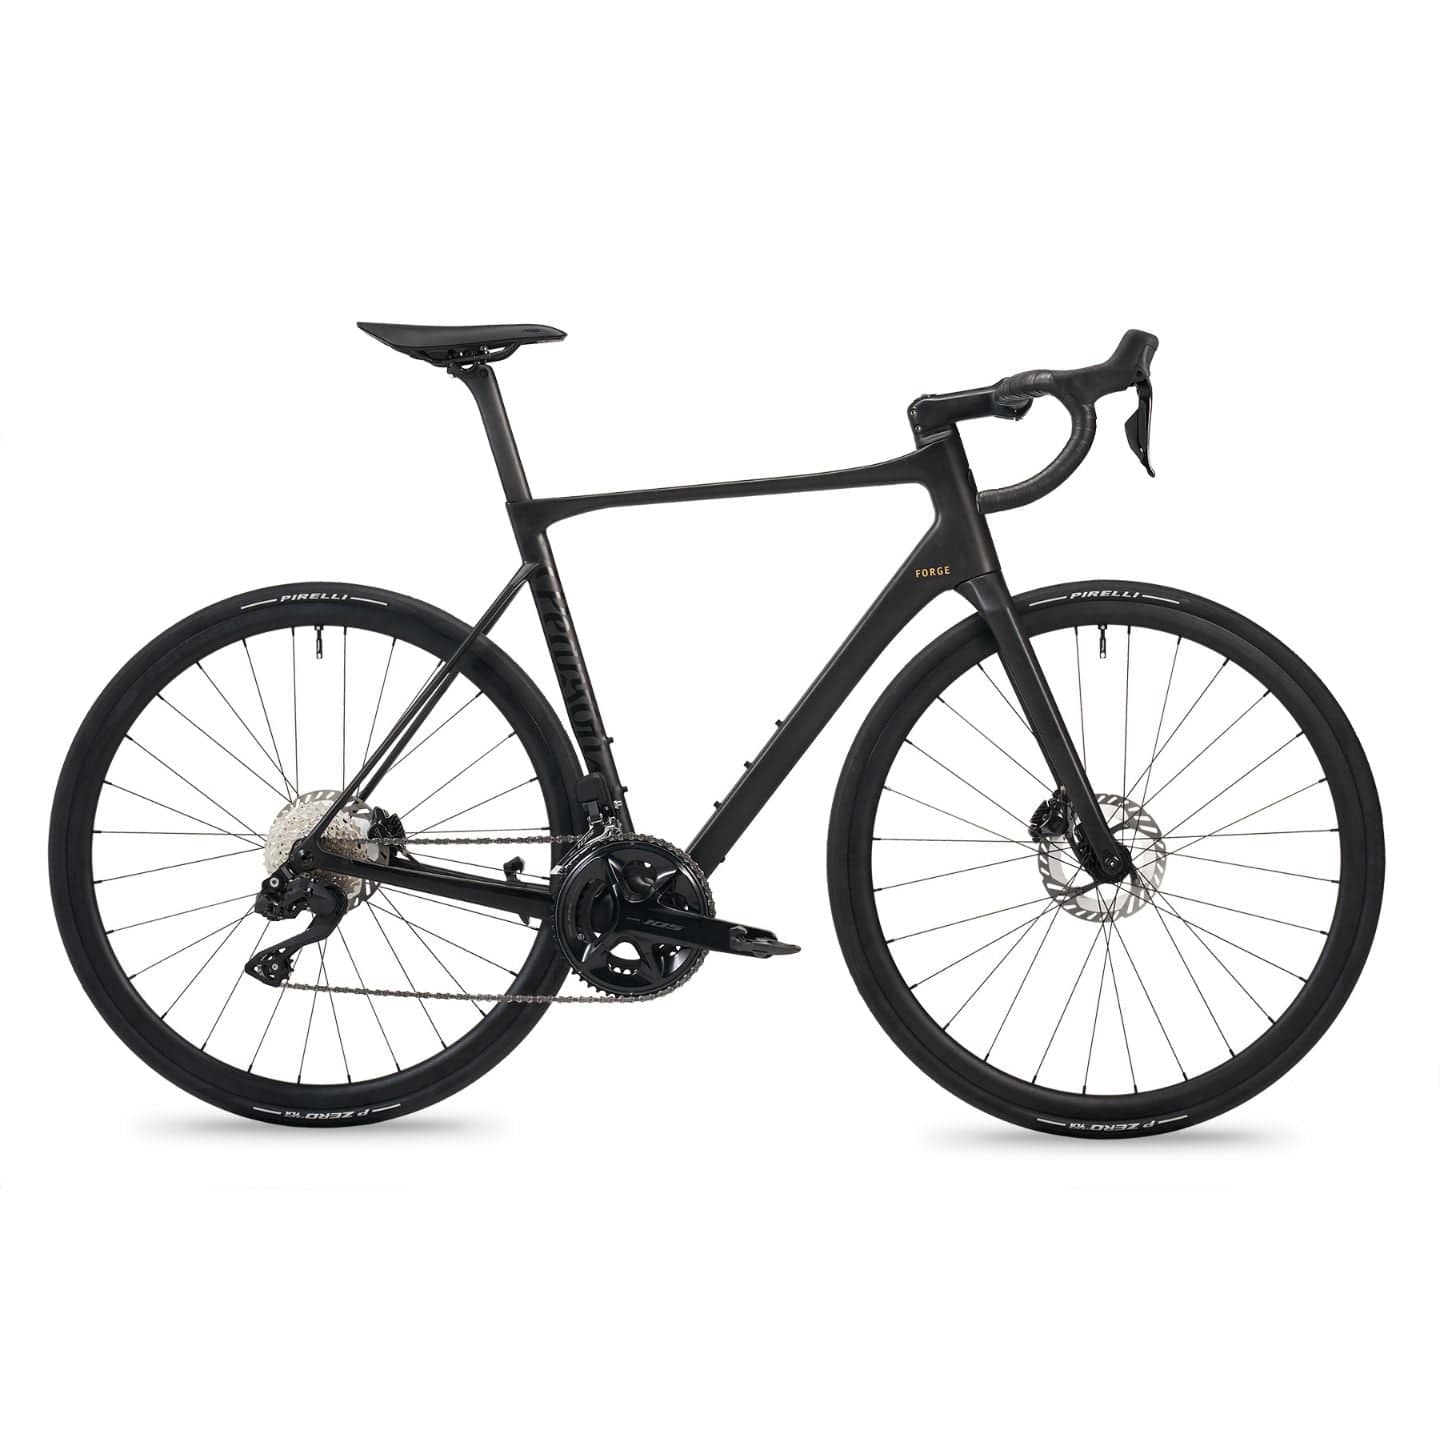 Pearson Cycles PCS, Forge - 105, 3 / Hammer Black